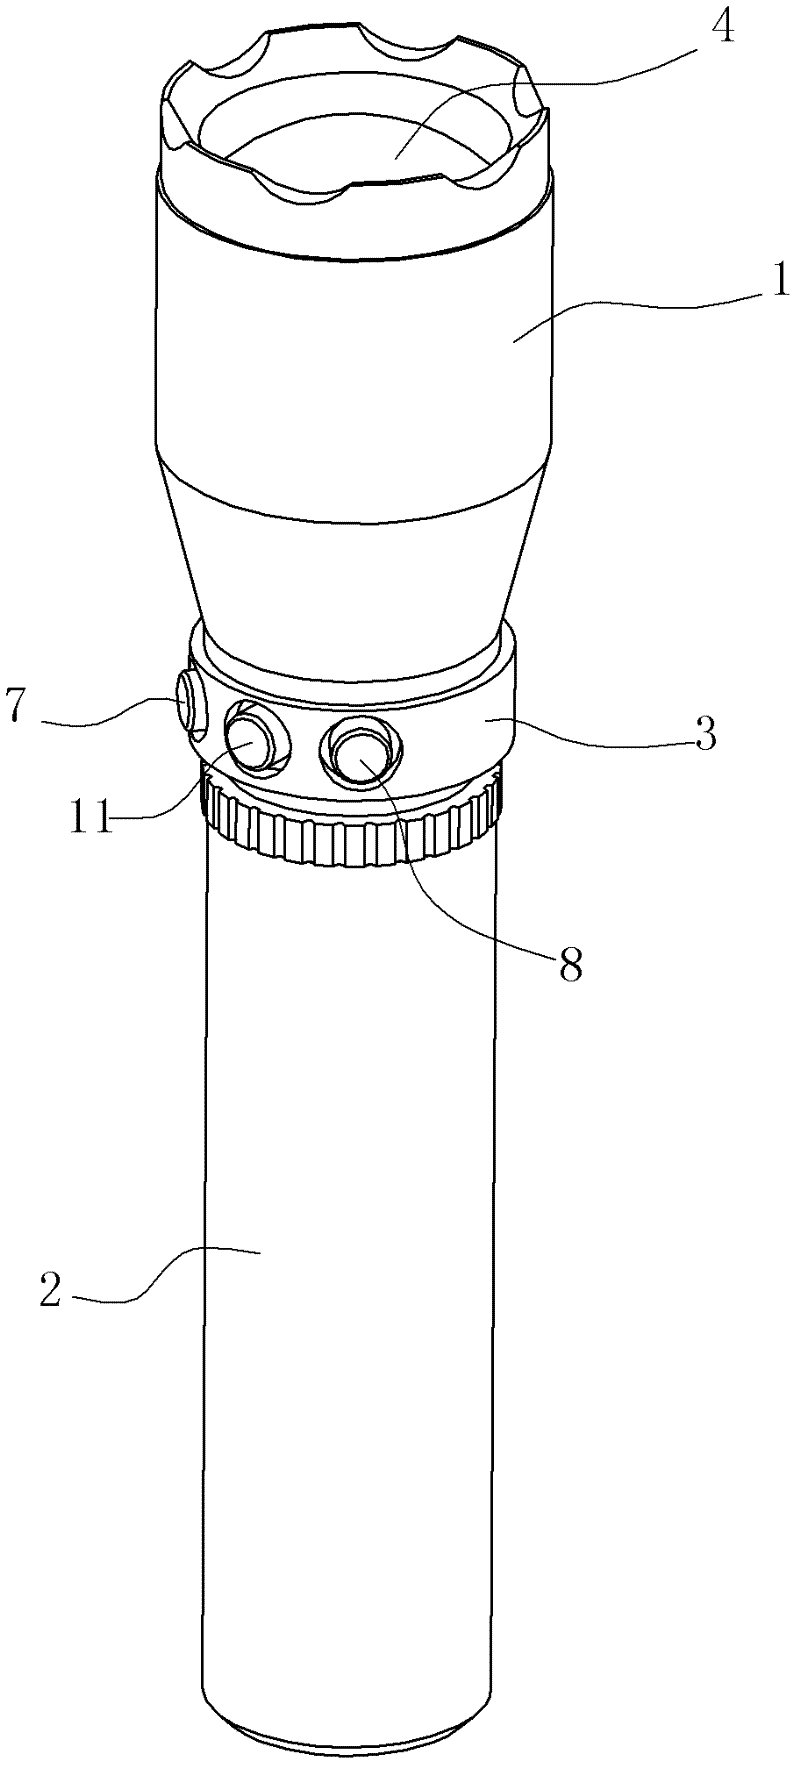 Flashlight capable of focusing automatically